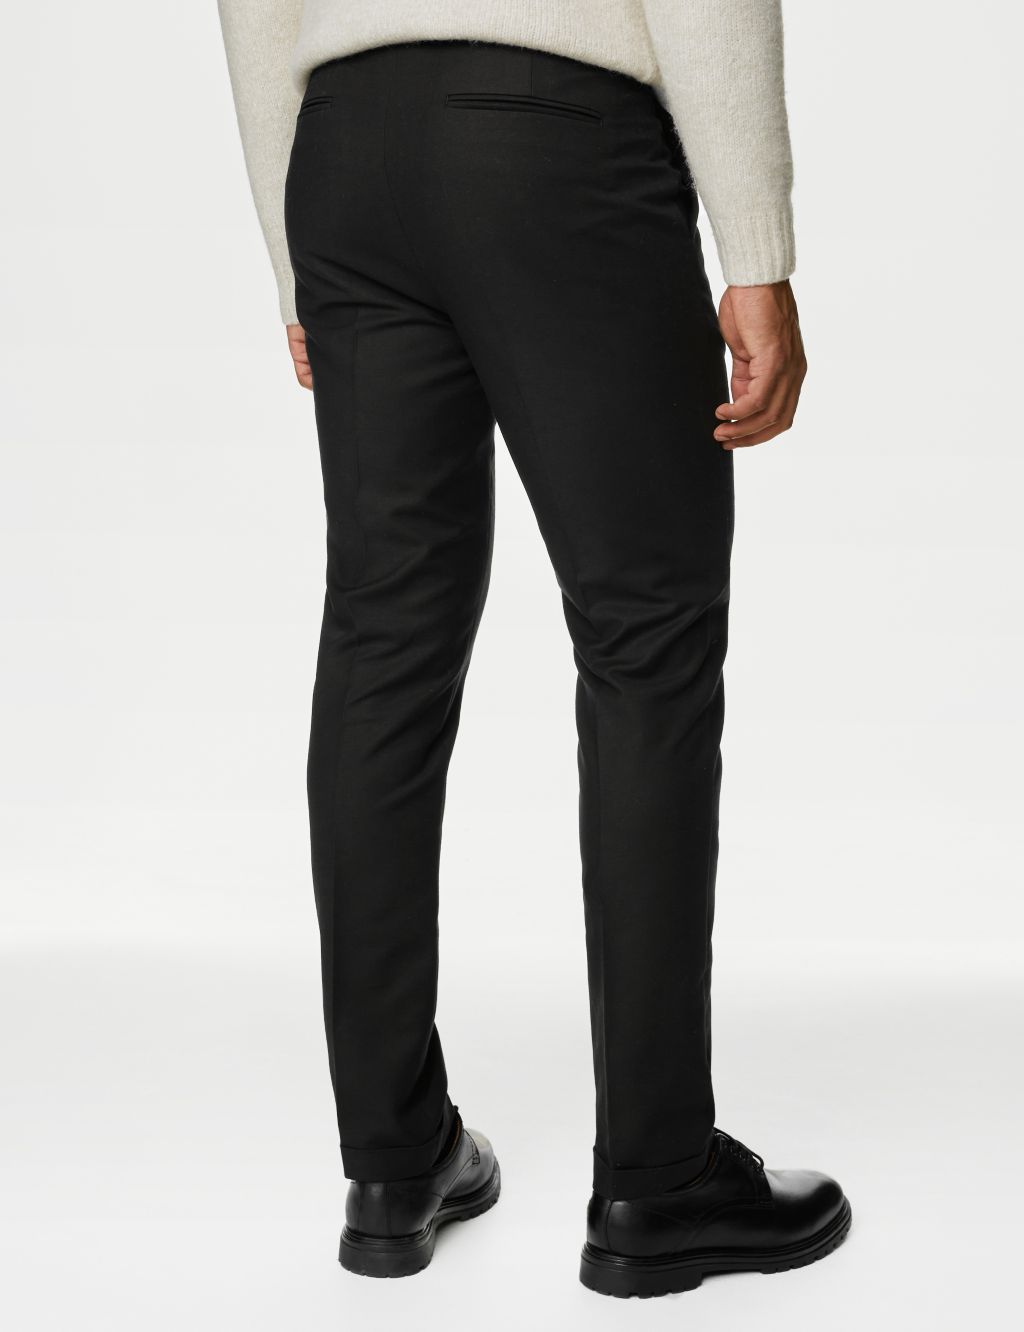 Tapered Fit Smart Stretch Chinos image 5